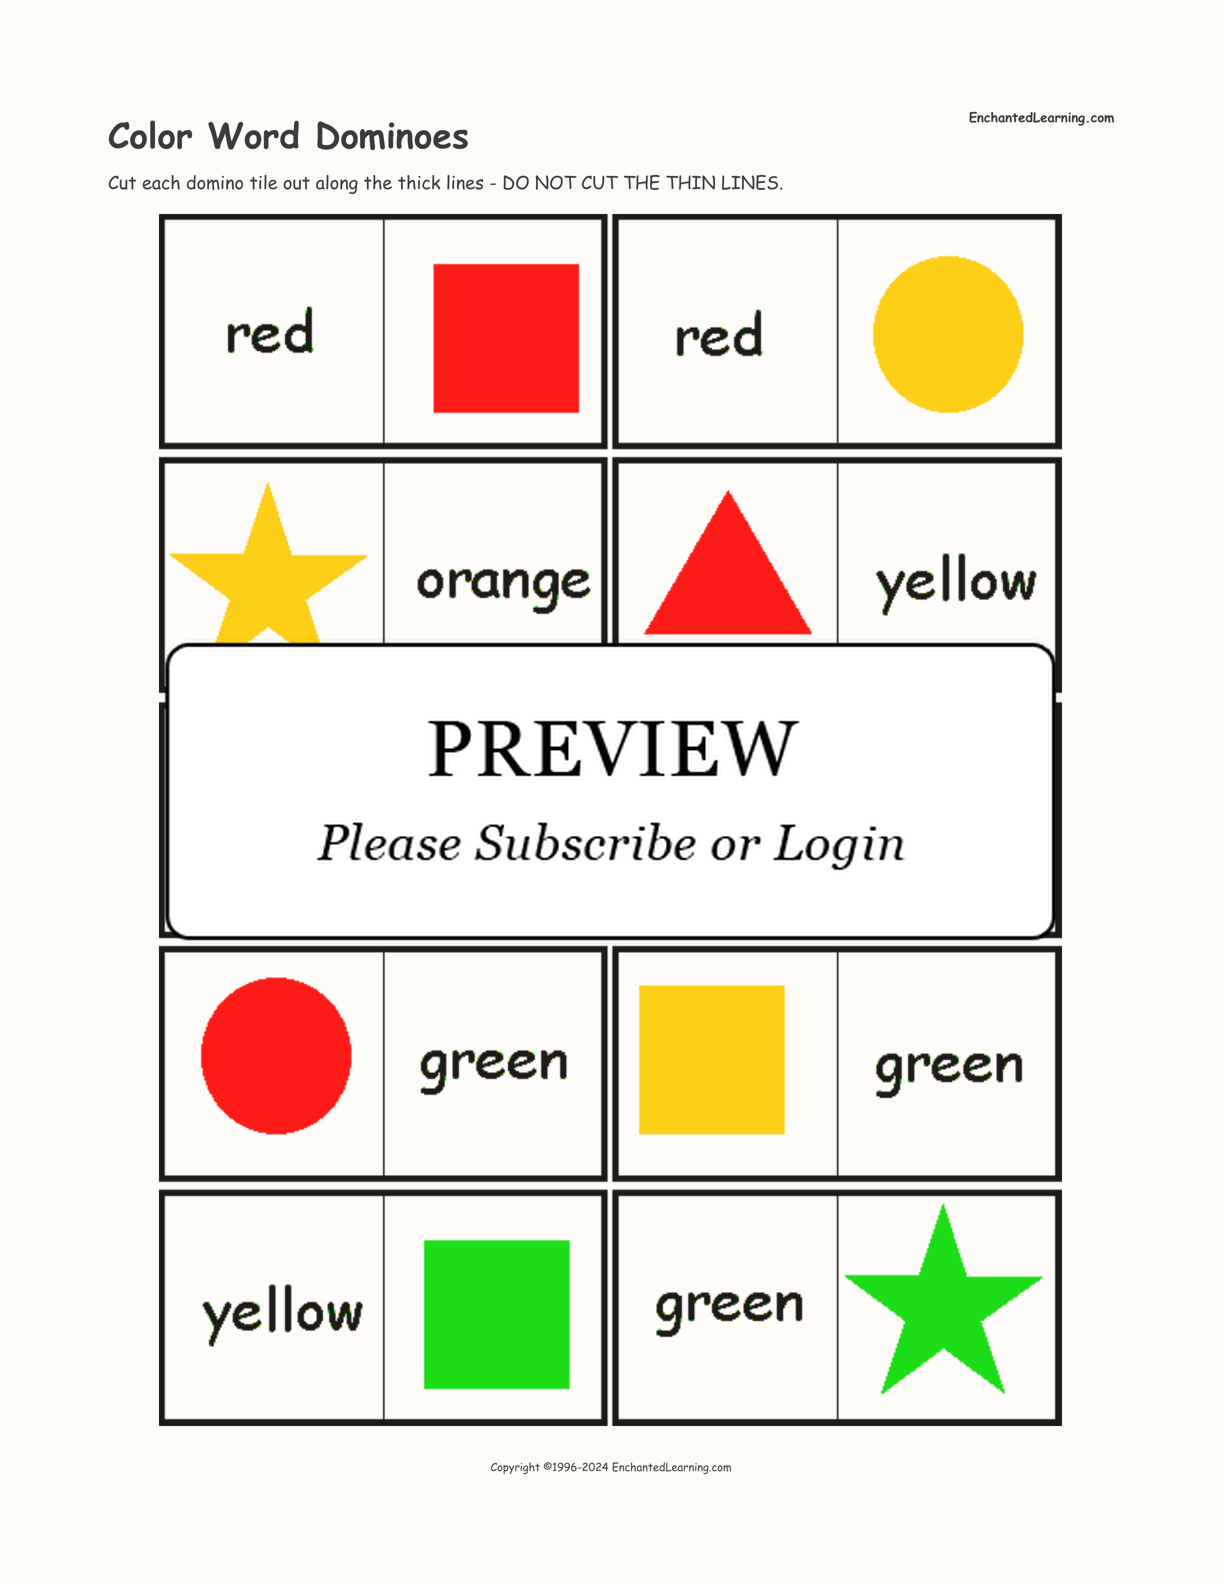 Color Word Dominoes interactive printout page 1